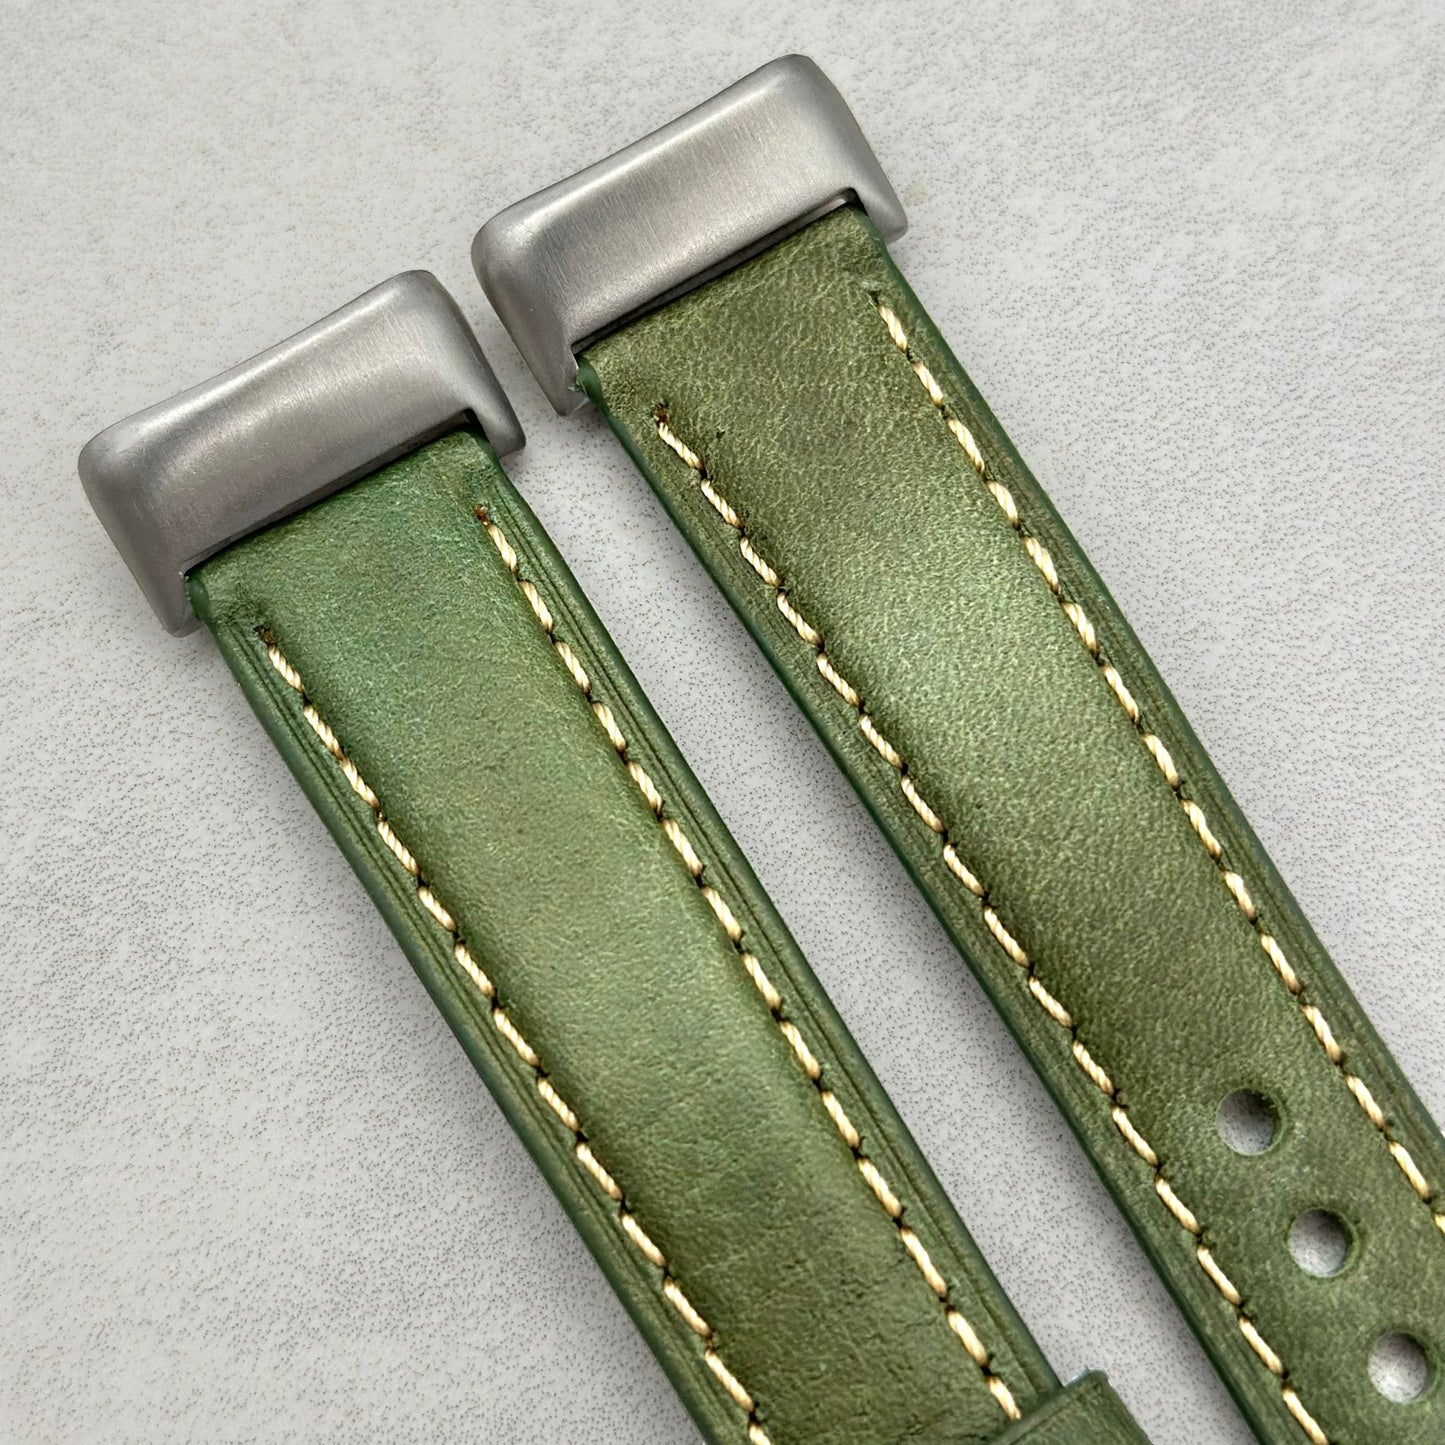 The Rome: Olive Green Italian Full Grain Leather Fitbit Charge Watch Strap